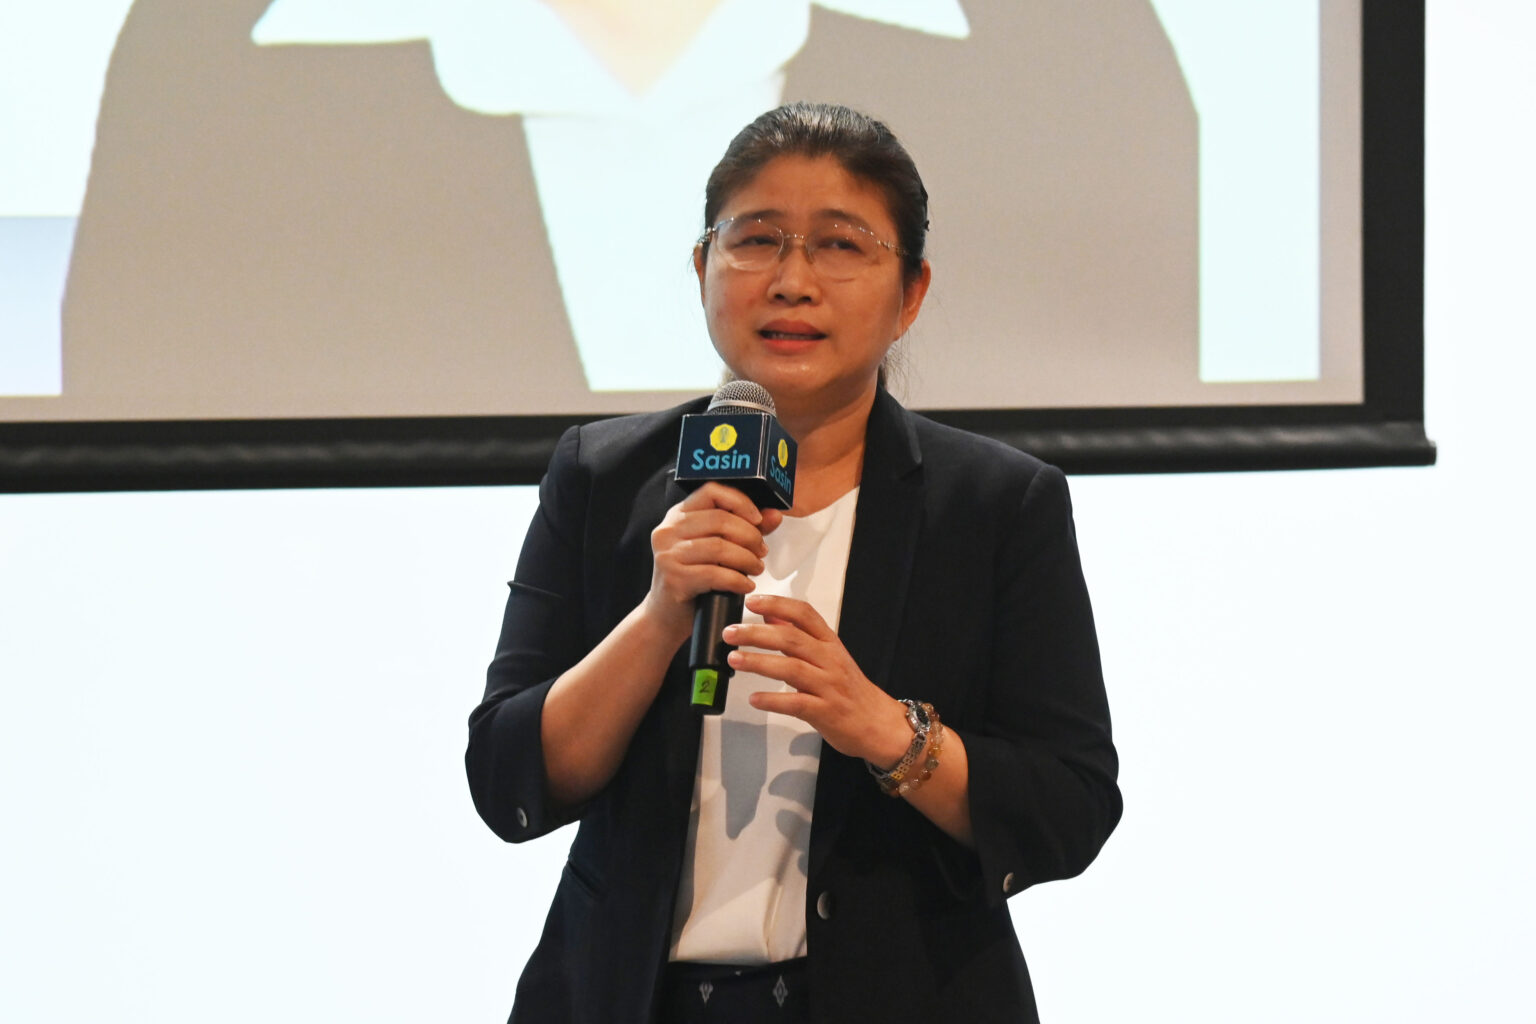 Ms. Sattakamon Kiatpanich, Director of the Research and Innovation Fund Administration Division 2, National Research Council of Thailand (NRCT)